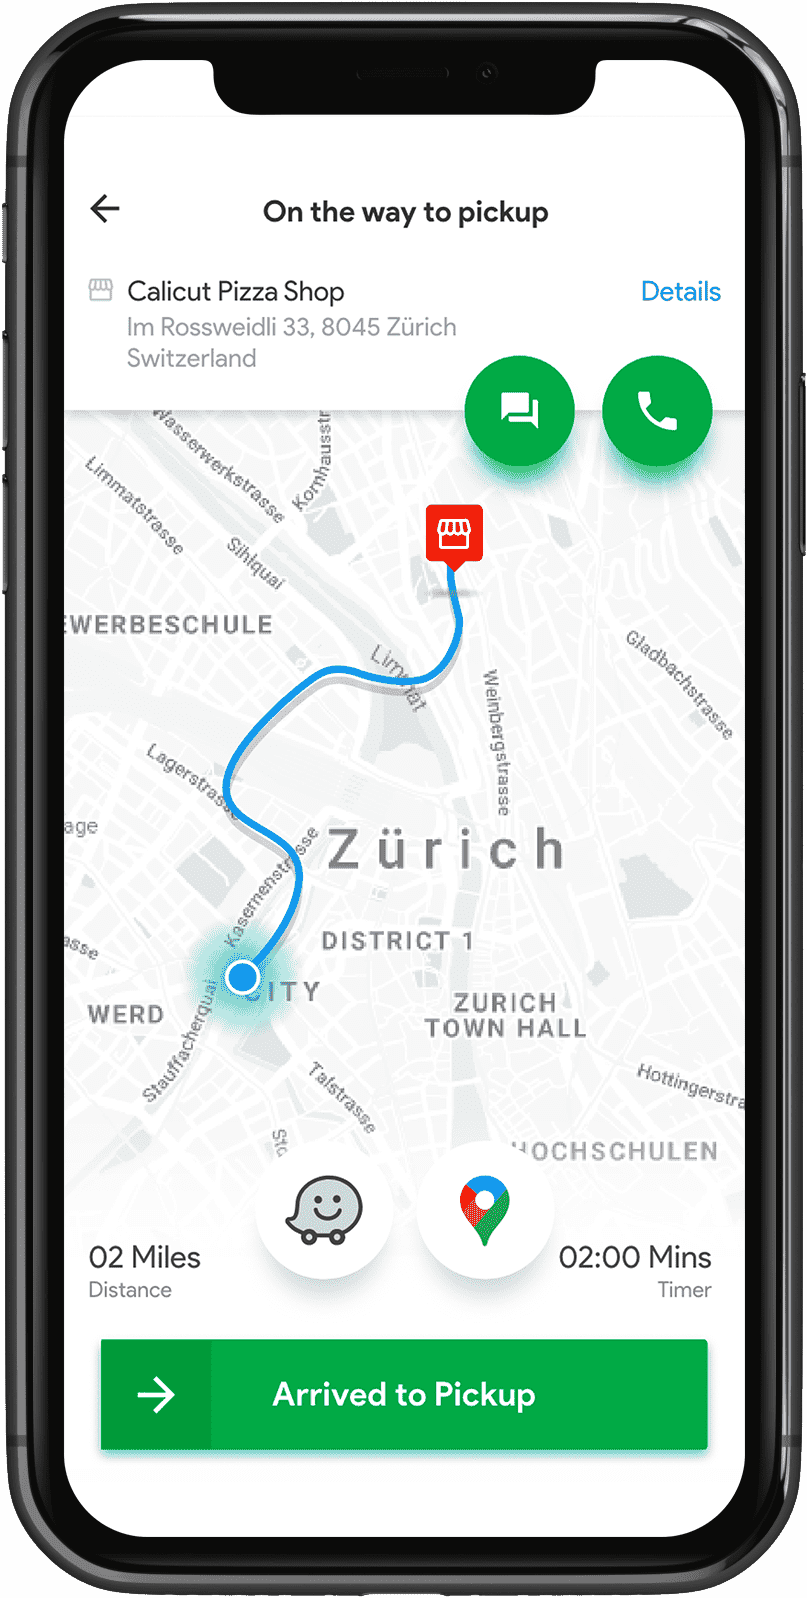 on-the-way-to-pickup-option-in-food-delivery-driver-app.png